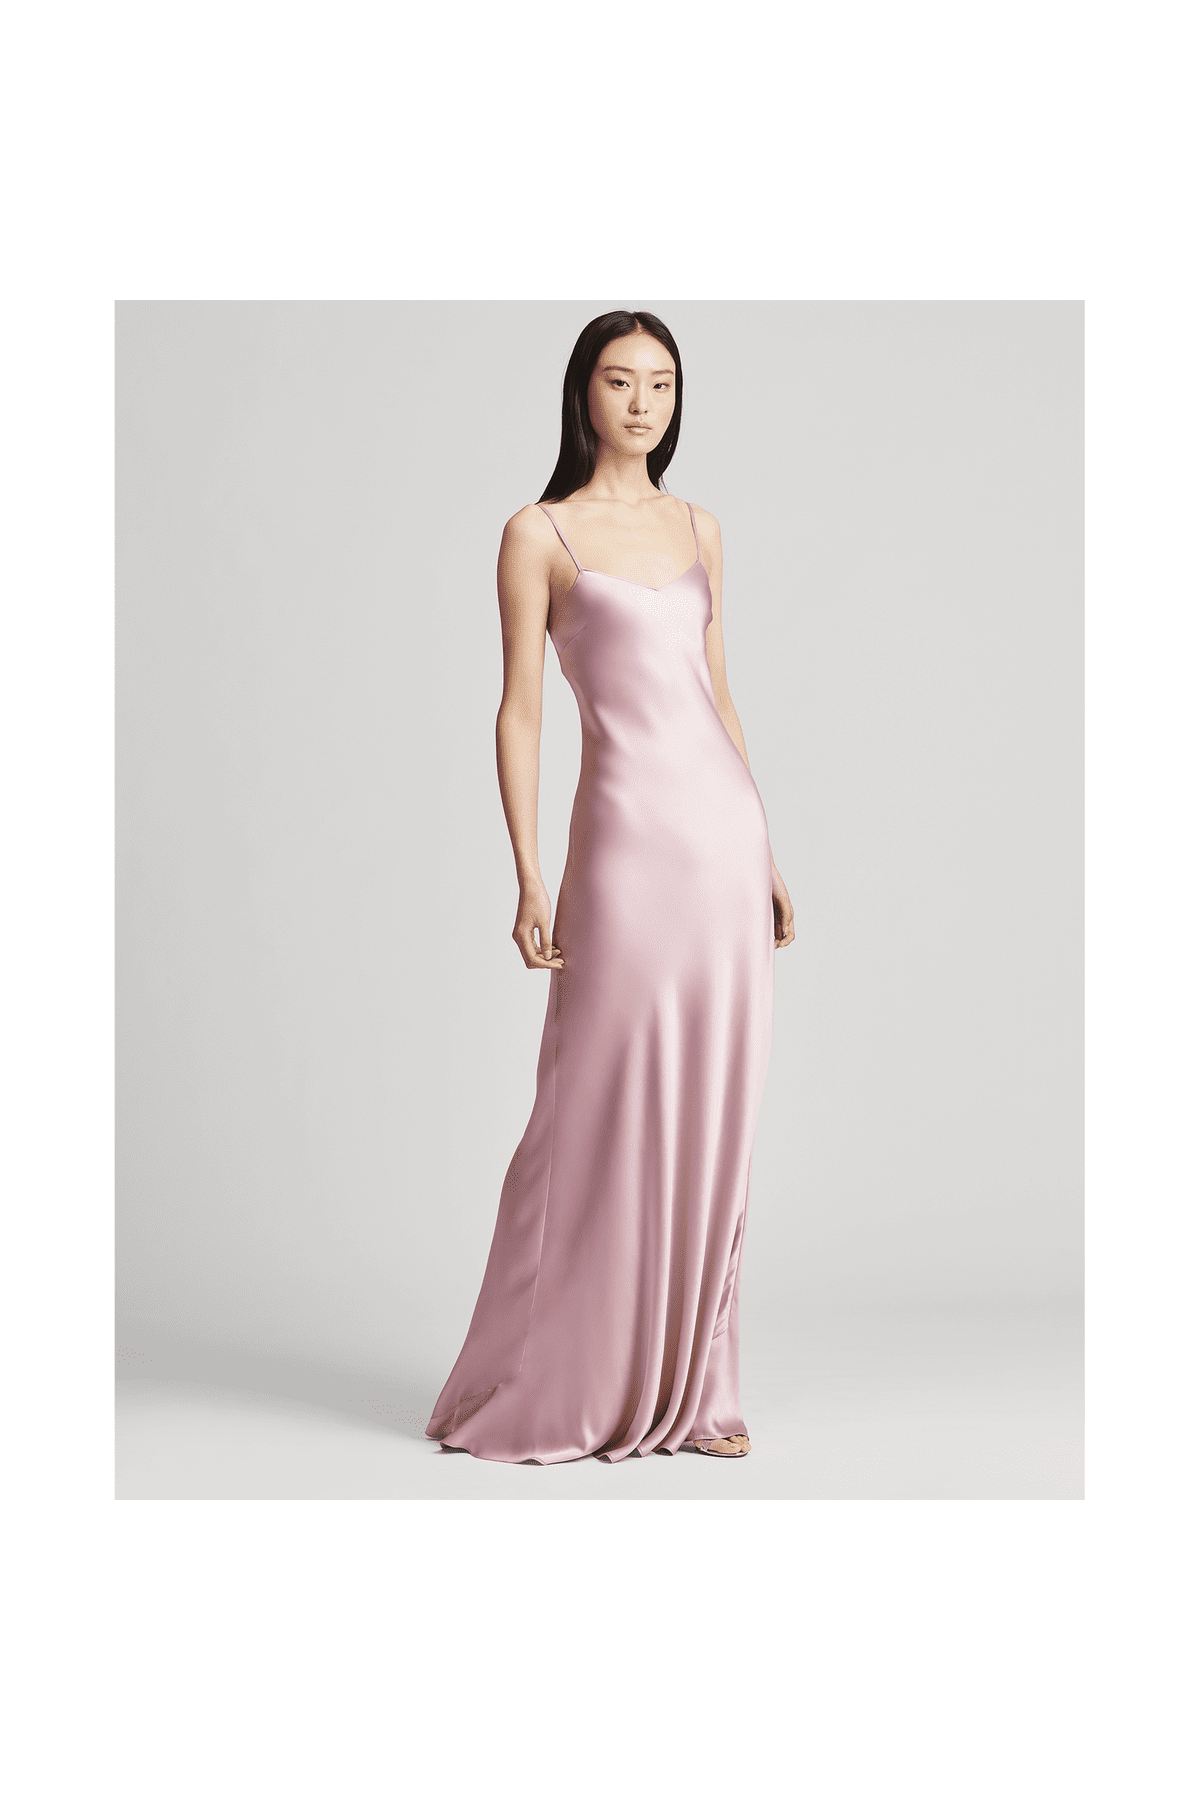 Shop It: Ralph Lauren Collection Satin Gown | The 10 Chicest Dresses Celebs  Have Worn This Summer — and Where to Get Them | POPSUGAR Fashion Photo 19